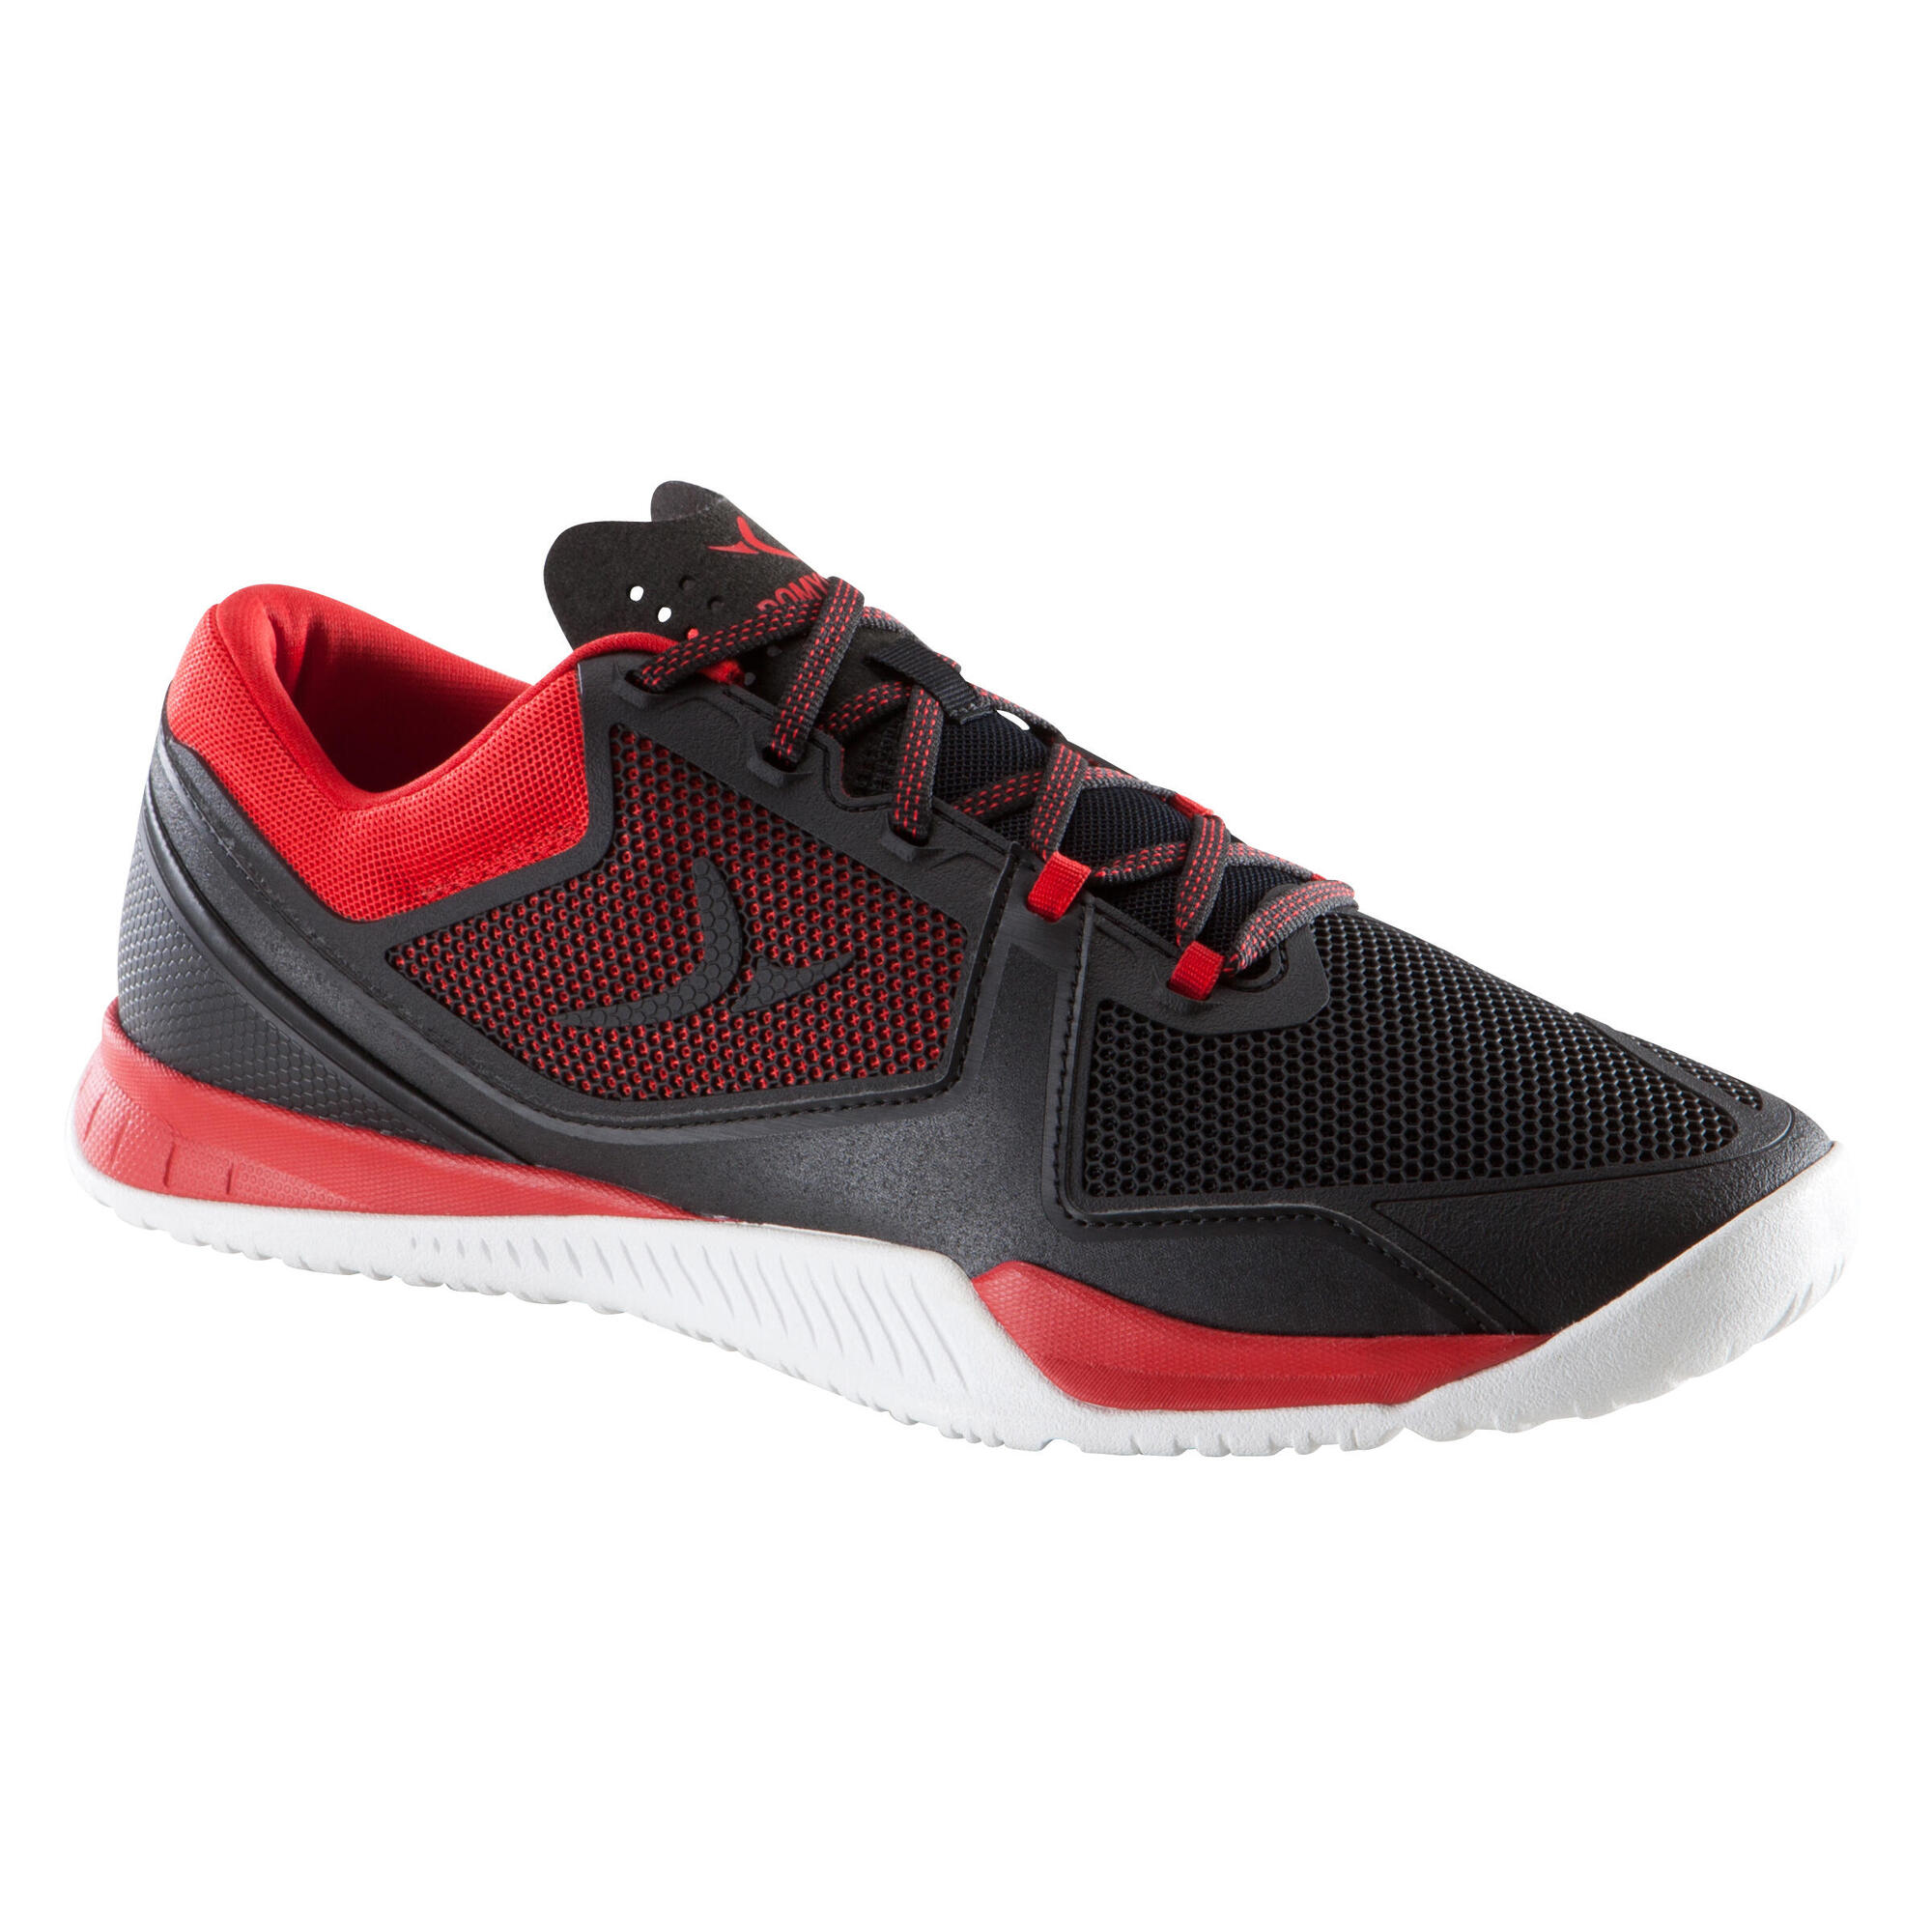 Strong 900 Cross-Training Shoes - Black 